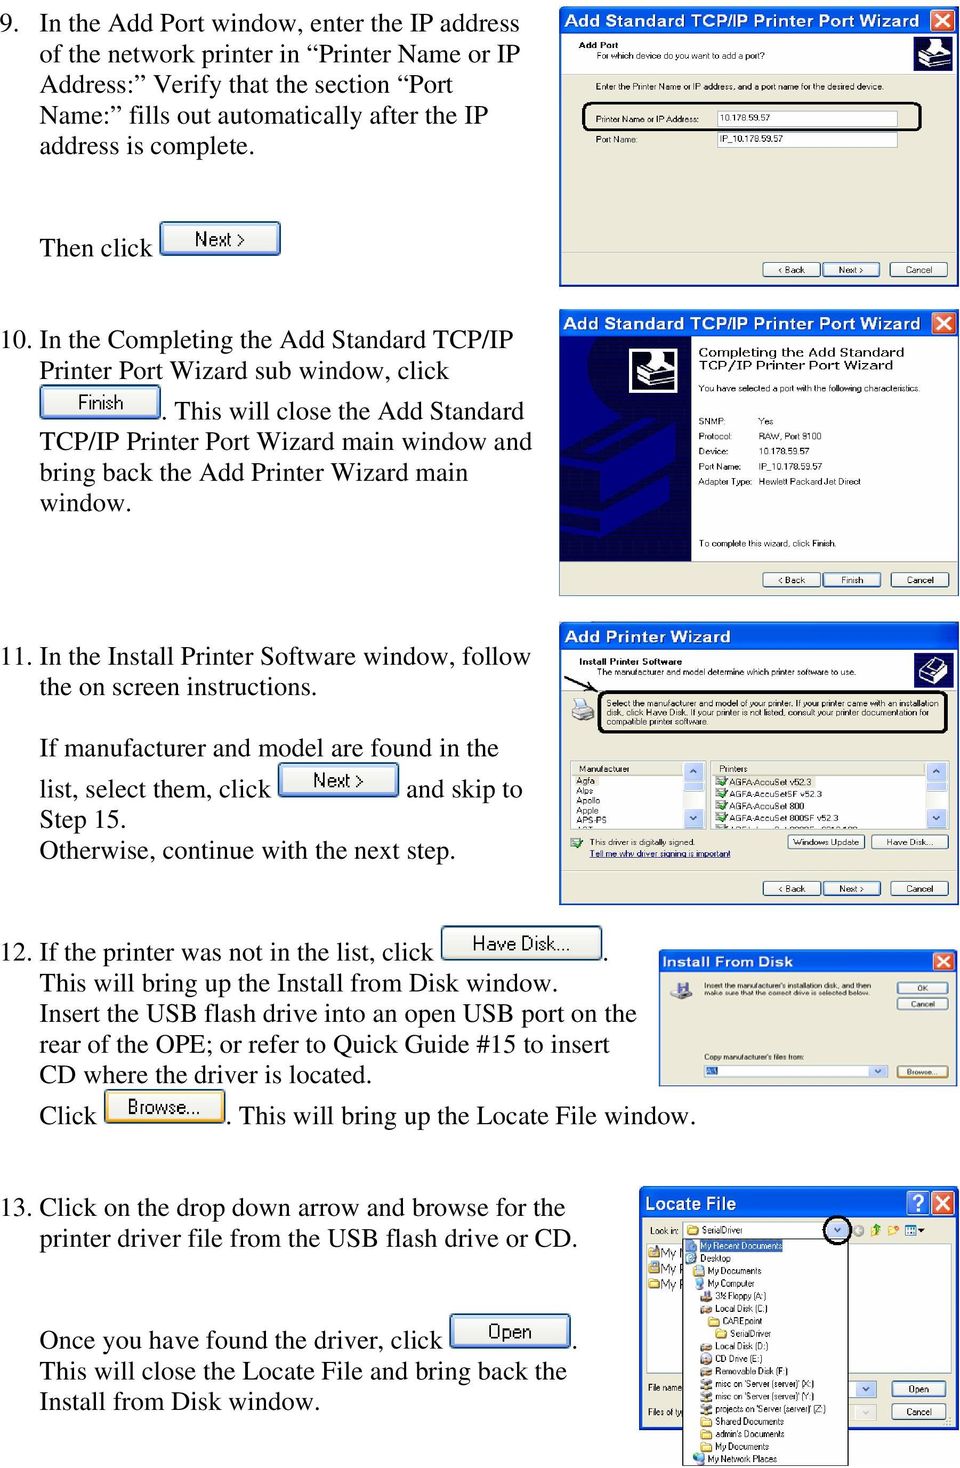 This will close the Add Standard TCP/IP Printer Port Wizard main window and bring back the Add Printer Wizard main window. 11.